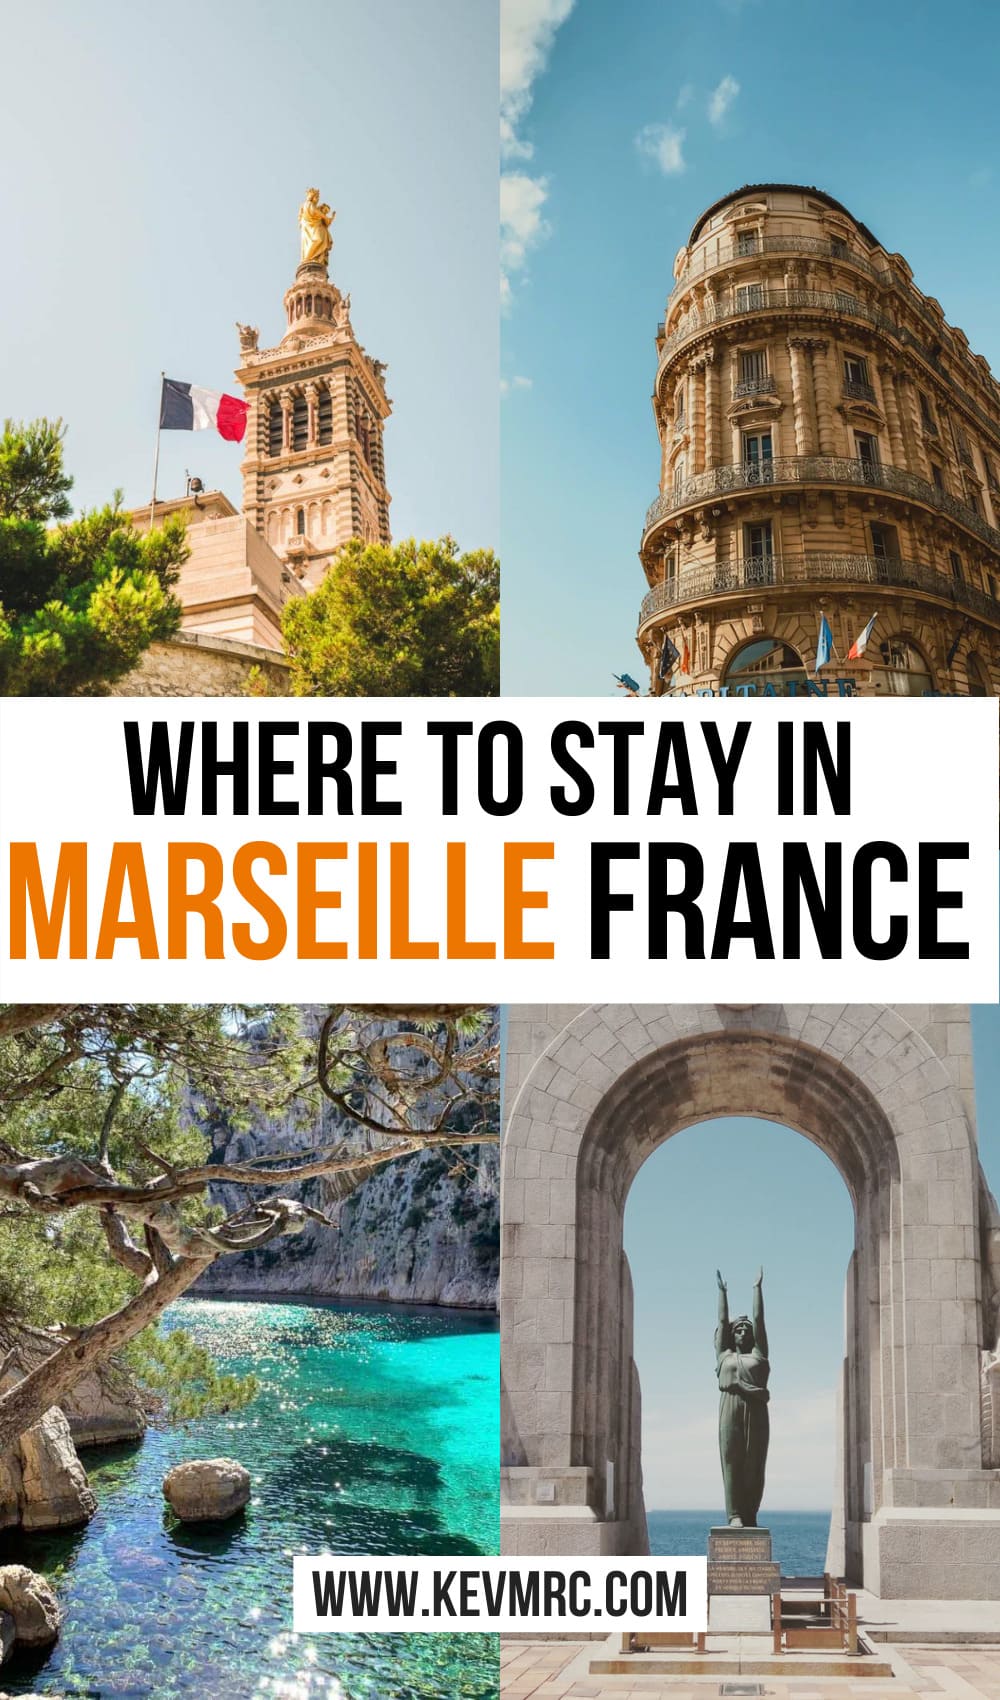 Looking for the safest and best place where to stay in Marseille France? That's exactly why I've wrote this guide, so you make sure to stay safe and enjoy your trip at its fullest! Let's find the best places to stay in Marseille, with pros and cons of each area! where to stay in marseille | marseille travel guide | hotel marseille | marseille france hotels